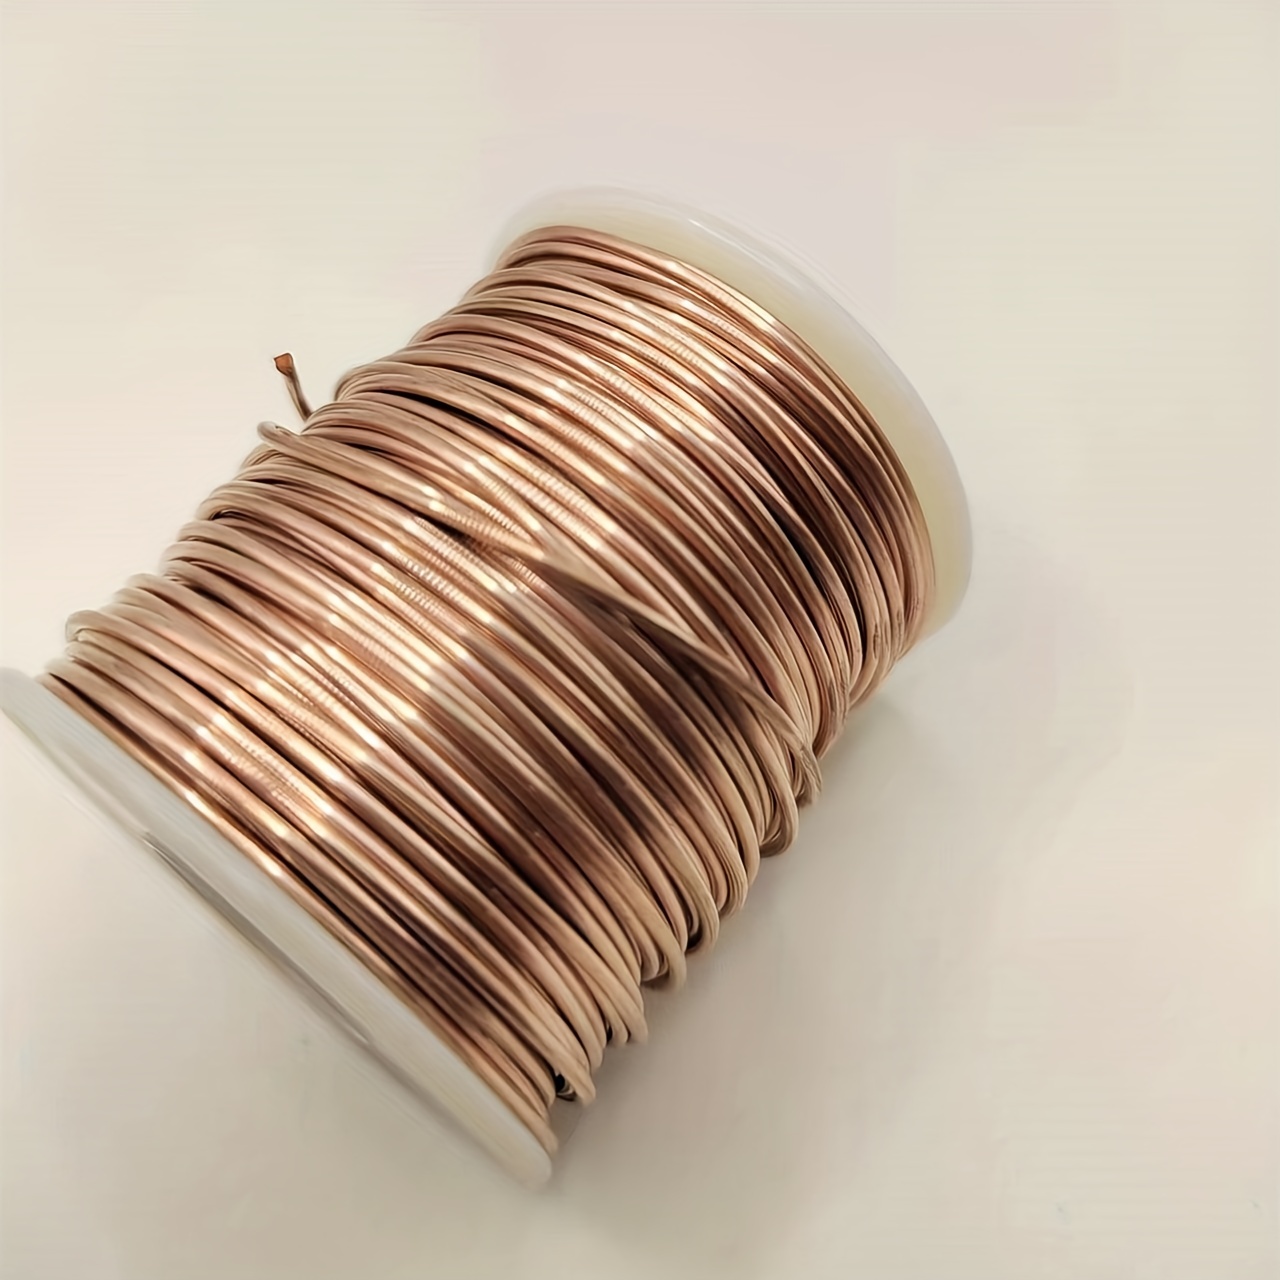 

Diameter 1.3mm*length 39m (127.9ft) A Roll Of Bare Copper Wire, Purple Copper Wire, Pure Copper Wire, Soft Solid Bare Copper Wire Round, Plus Shaft Soft Copper Wire, Good Storage